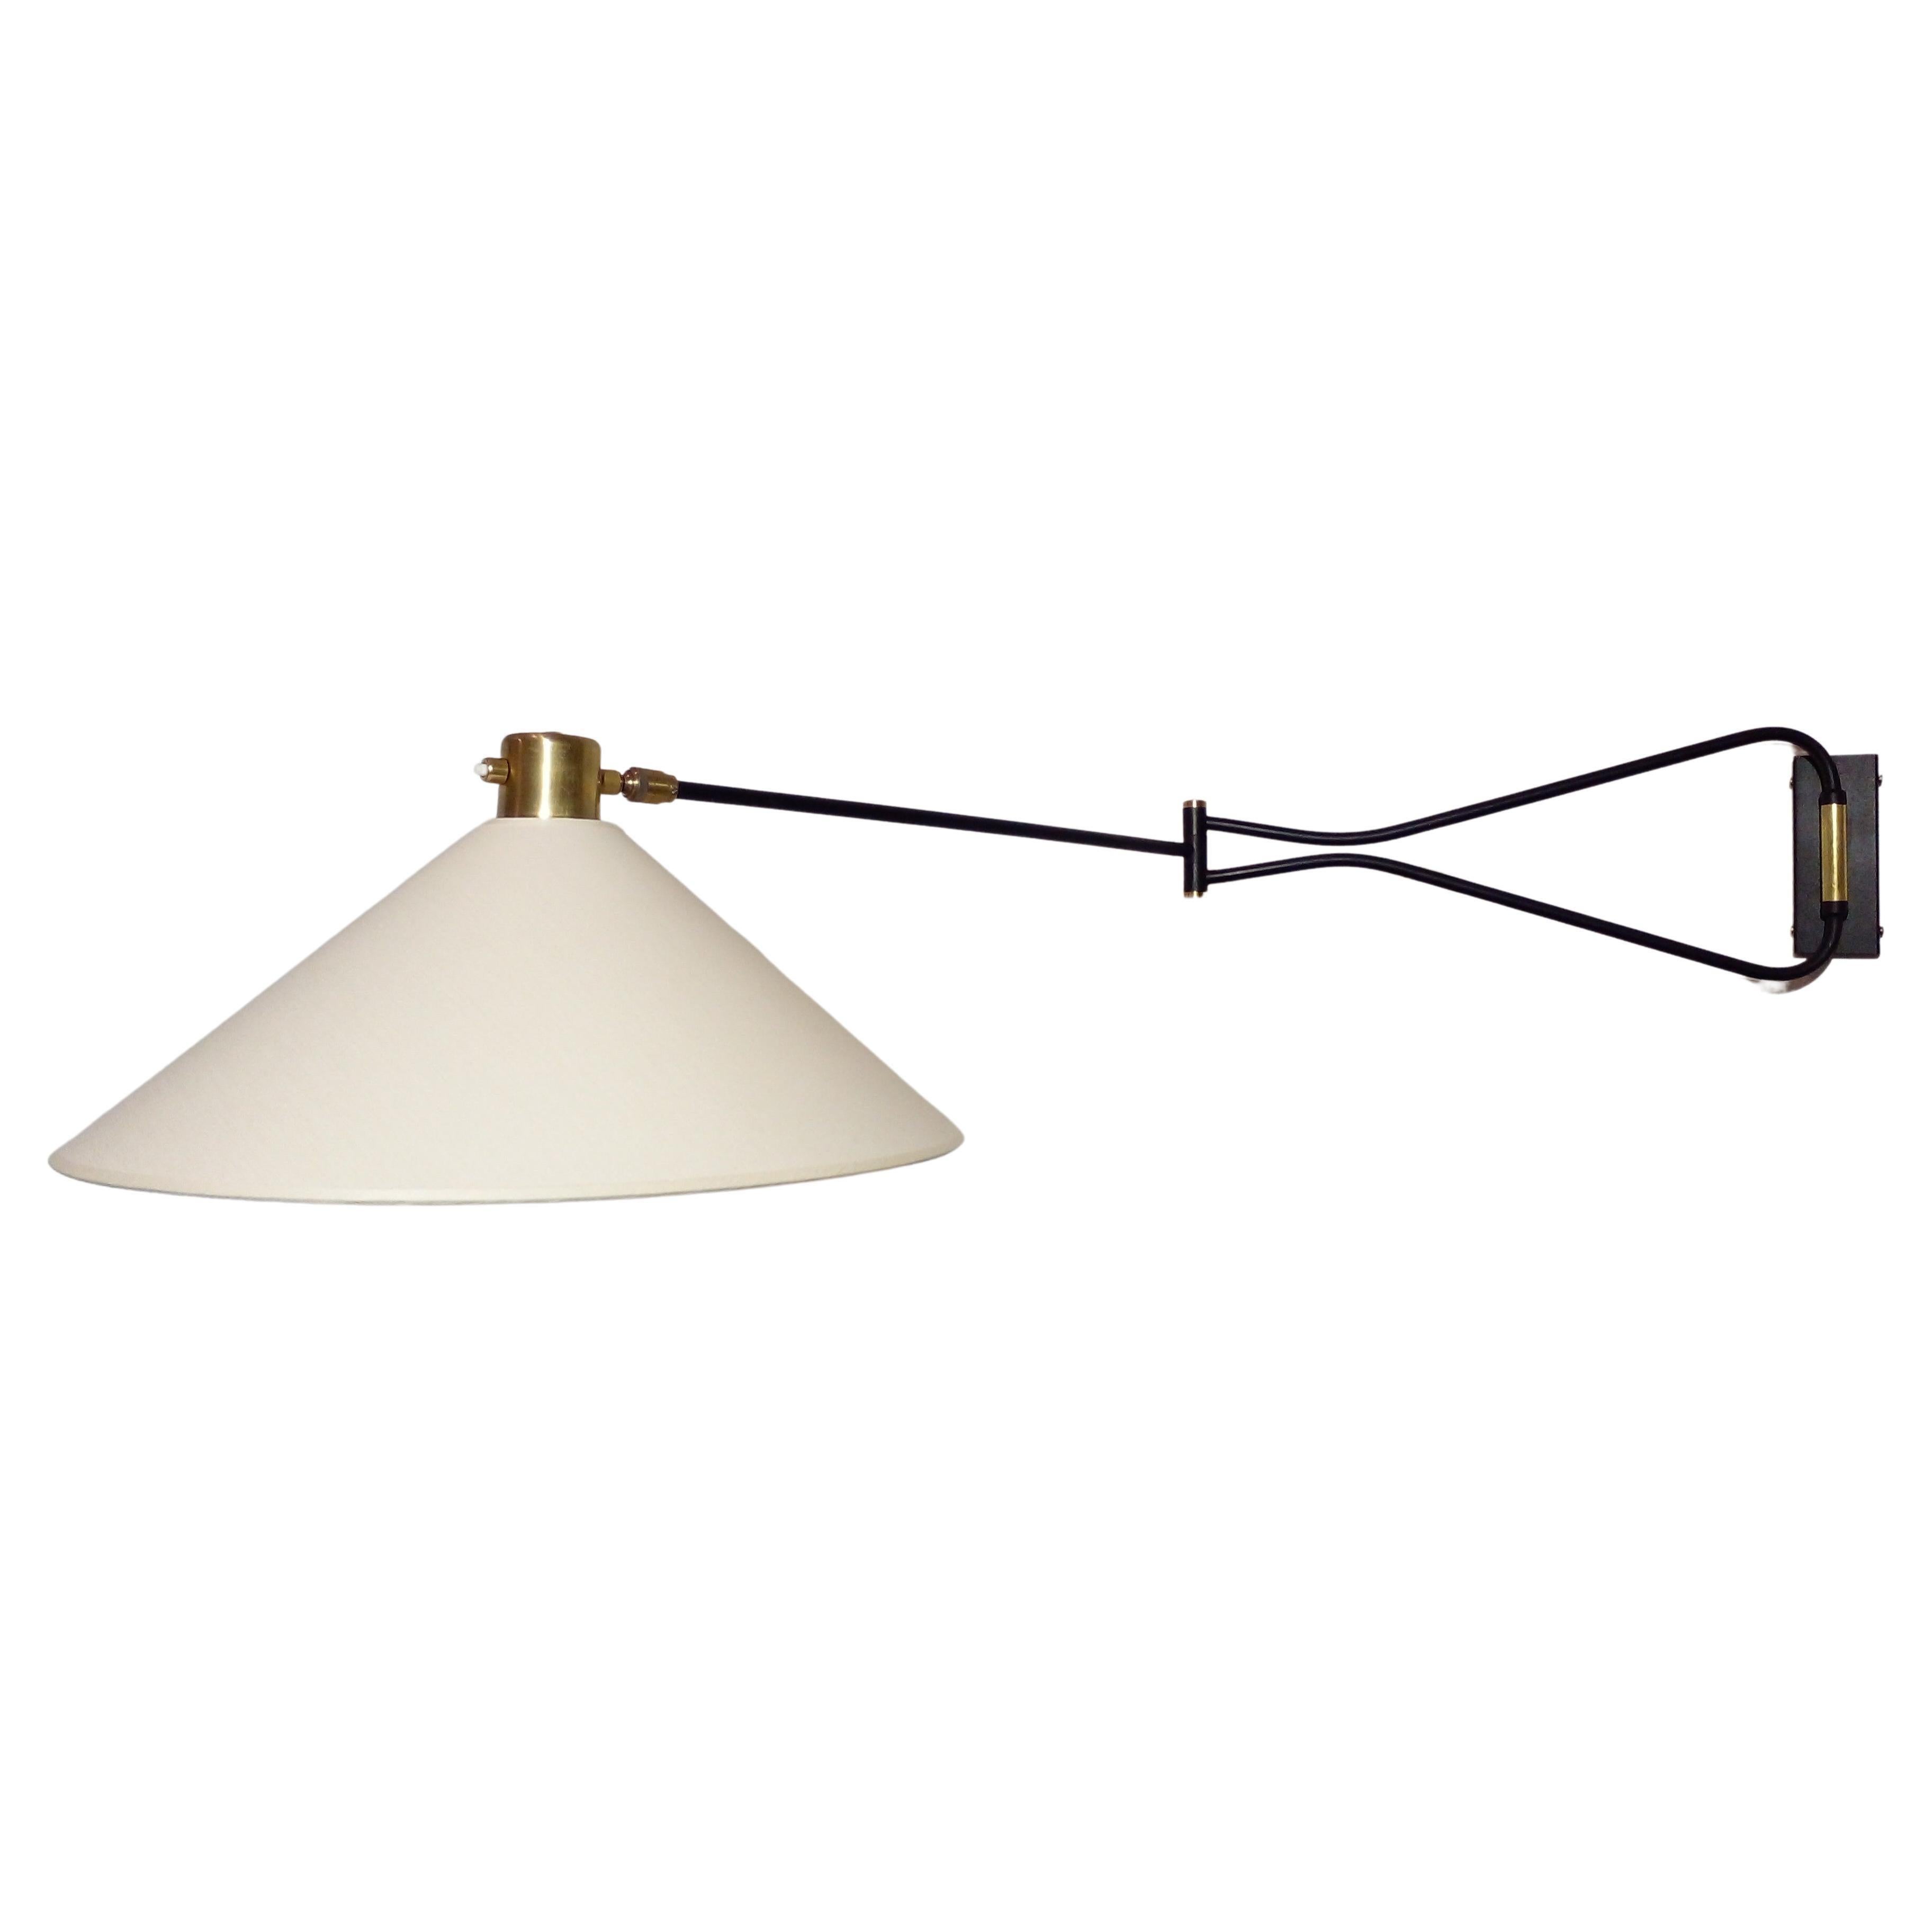 Wall lamp by Arlus Edition, France, circa 1950.
Black lacquered metal and brass, new cotton shade and light bulb cover redone as identical.
With two articulations at 360° and a patella above the lampshade.

A pair of wall lights